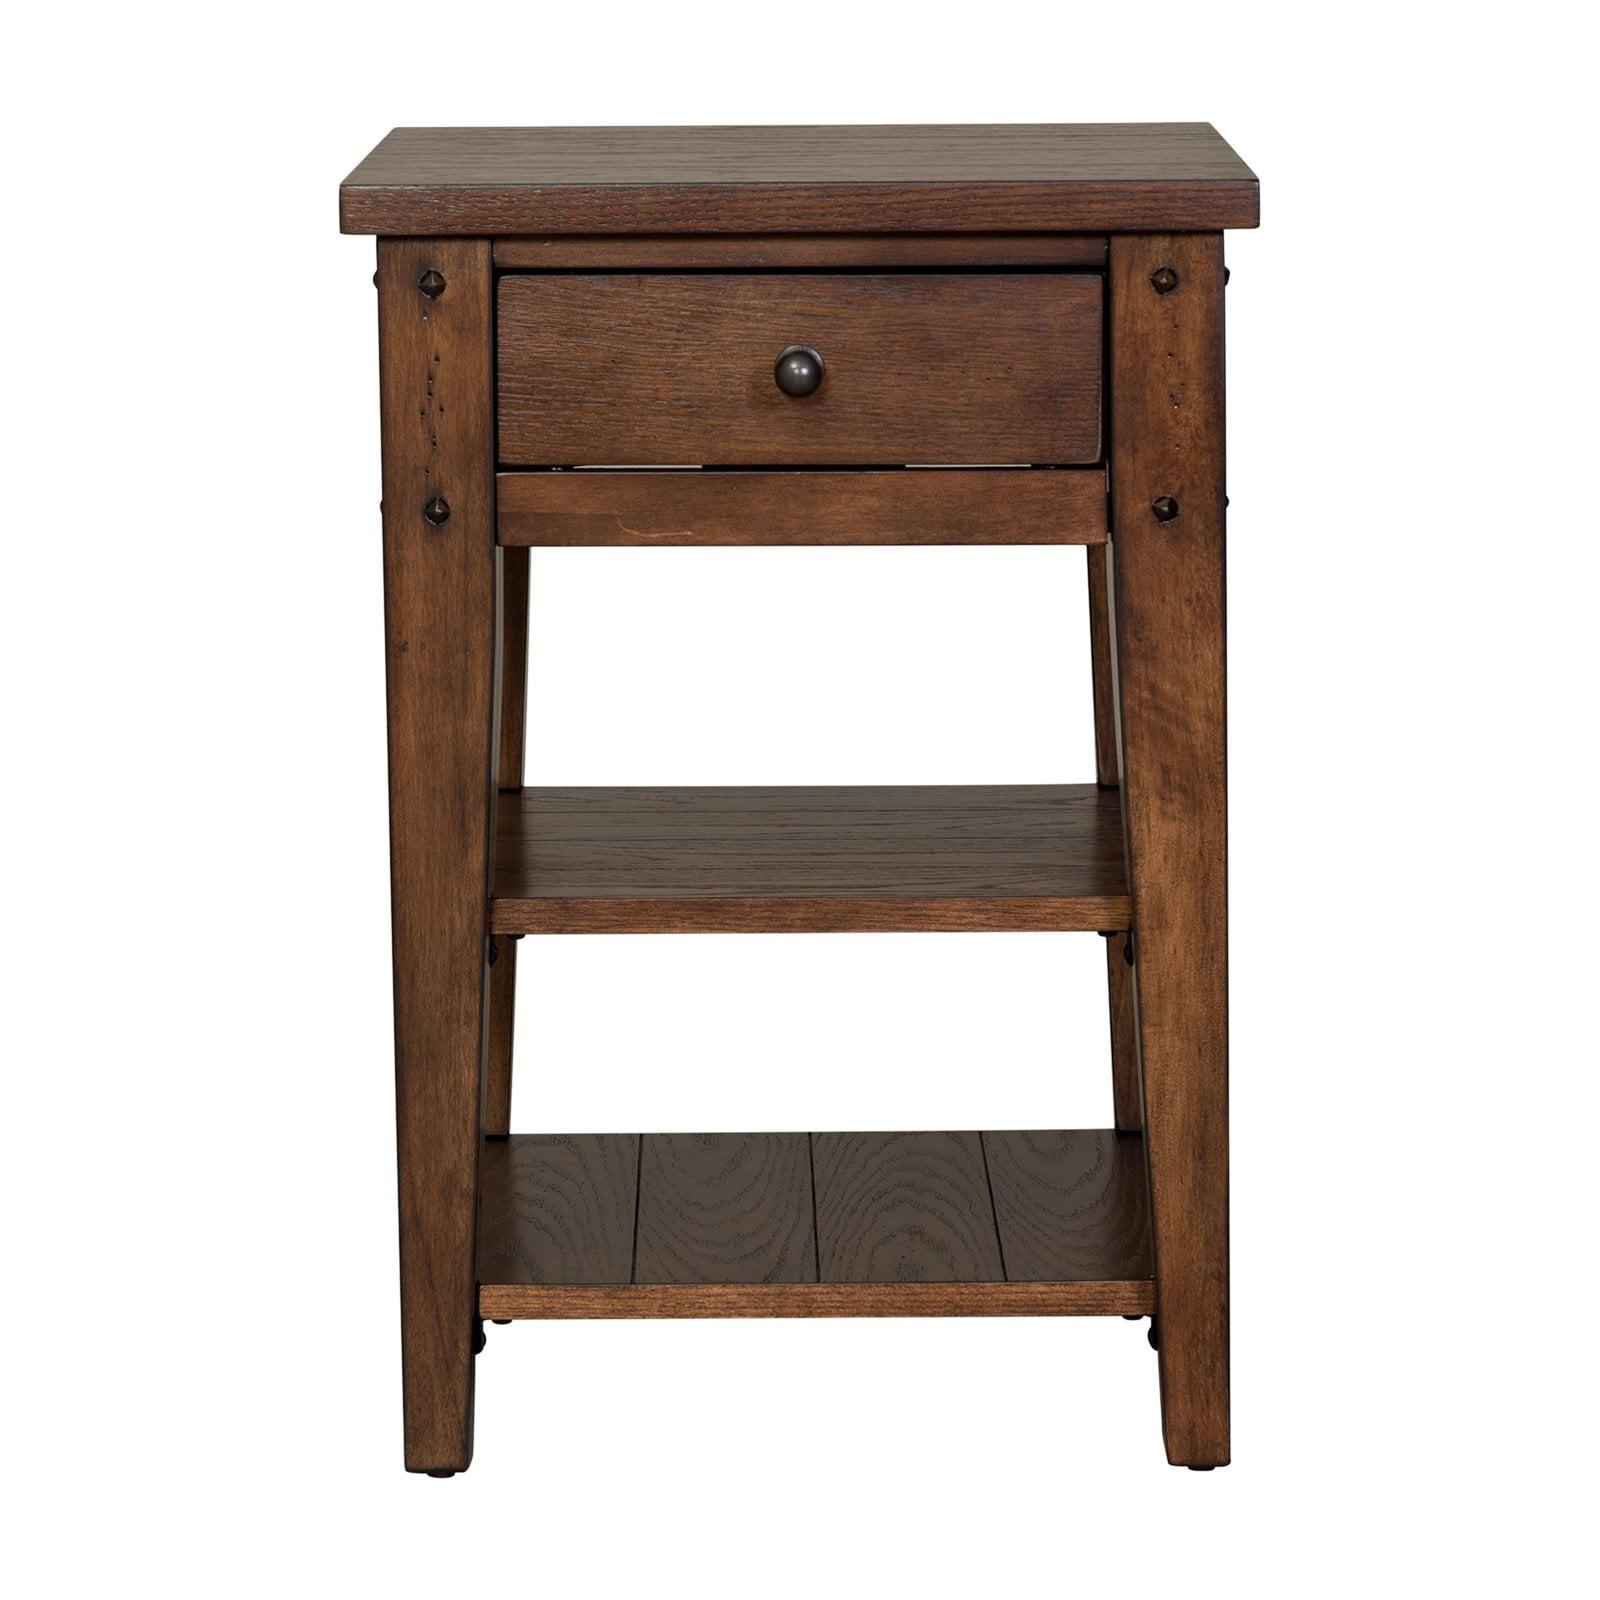 Rustic Brown Oak Square Chairside Table with Storage